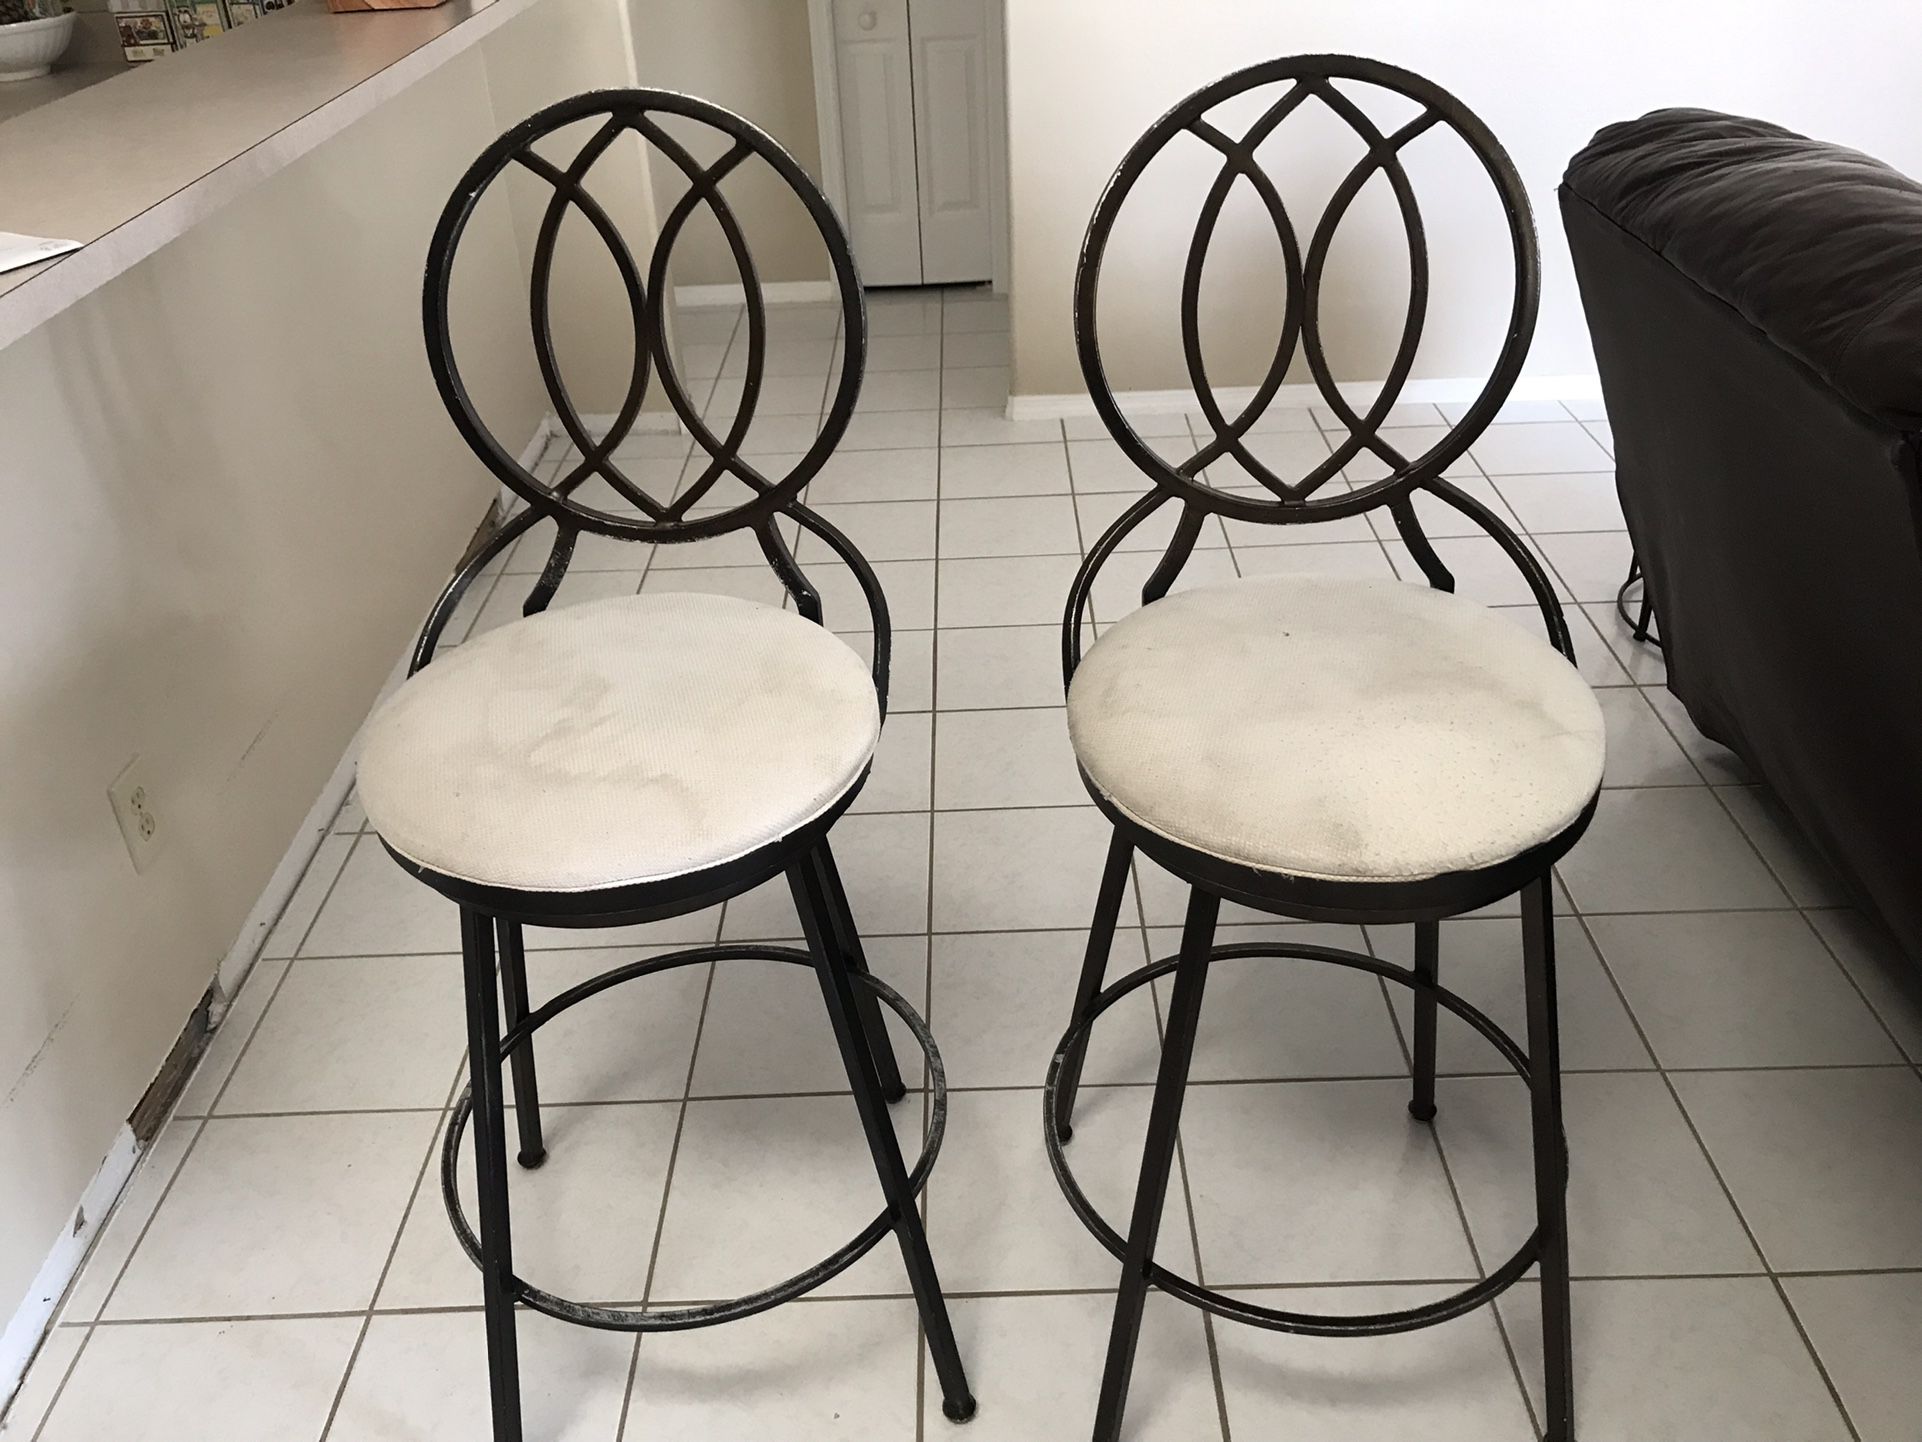 Barstools, Chair, Side Table ($50 for all four)